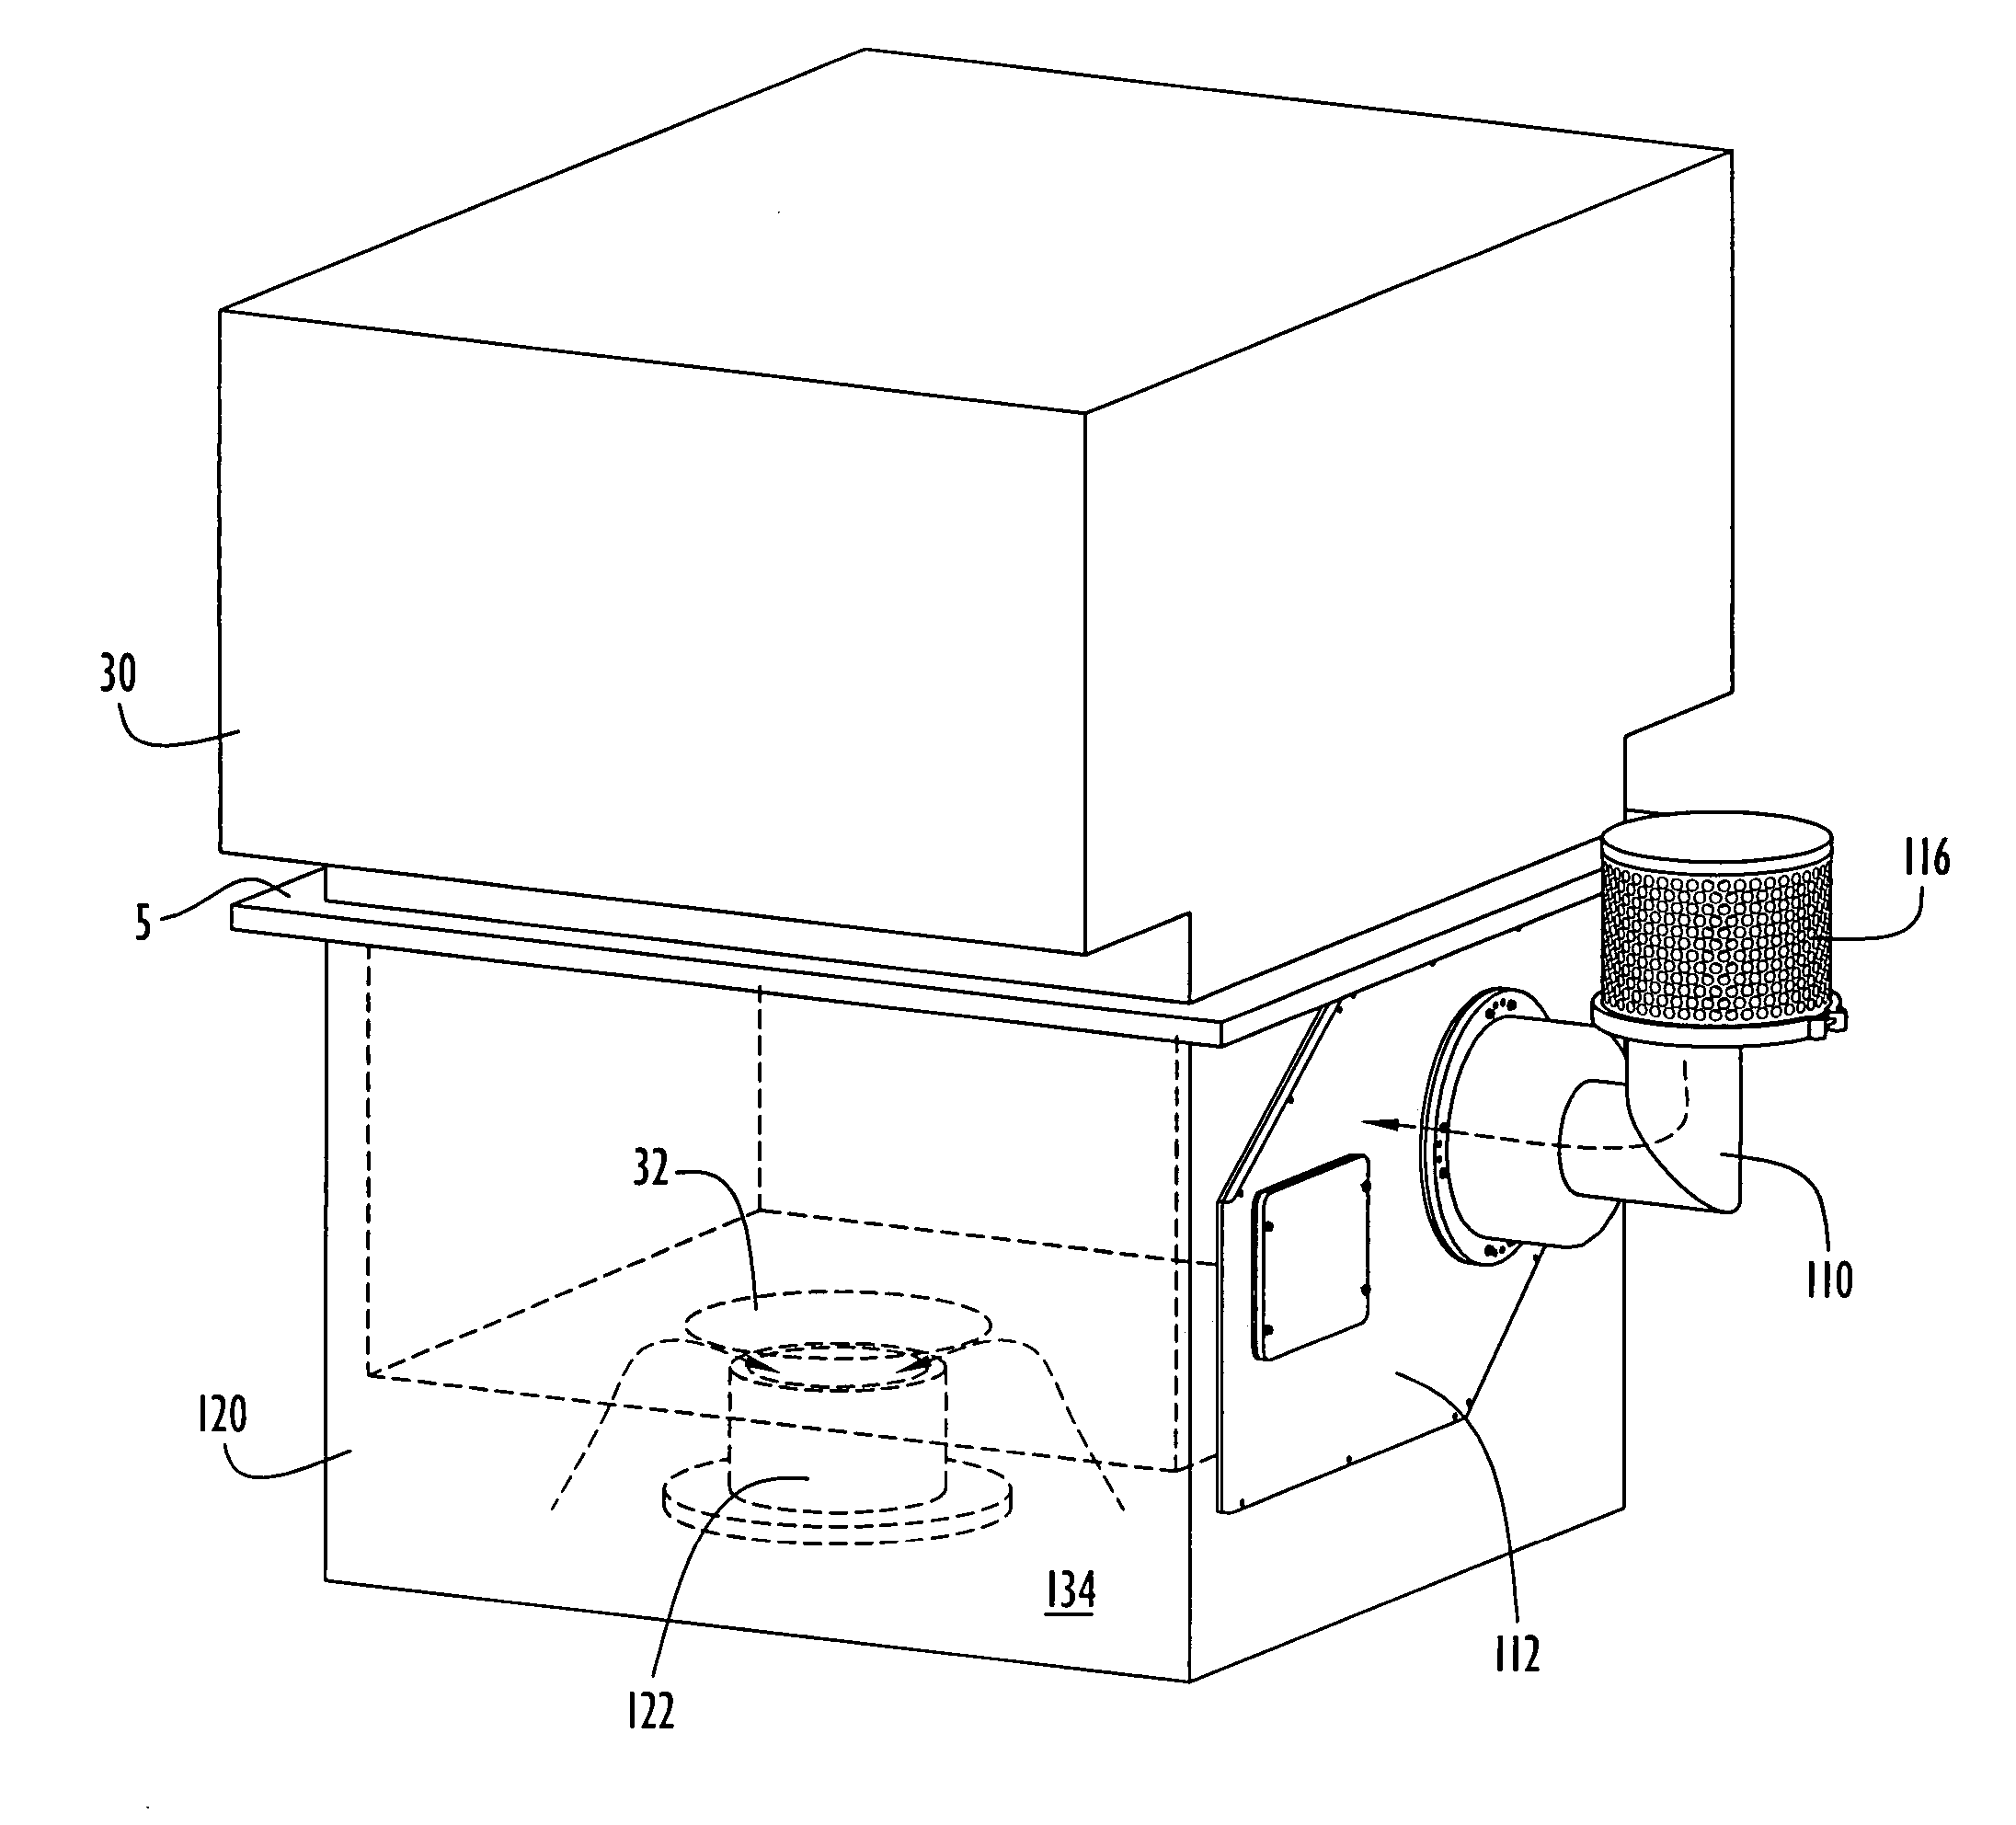 Dust mitigation and surface cleaning system for maintaining a surface free from dust and other materials